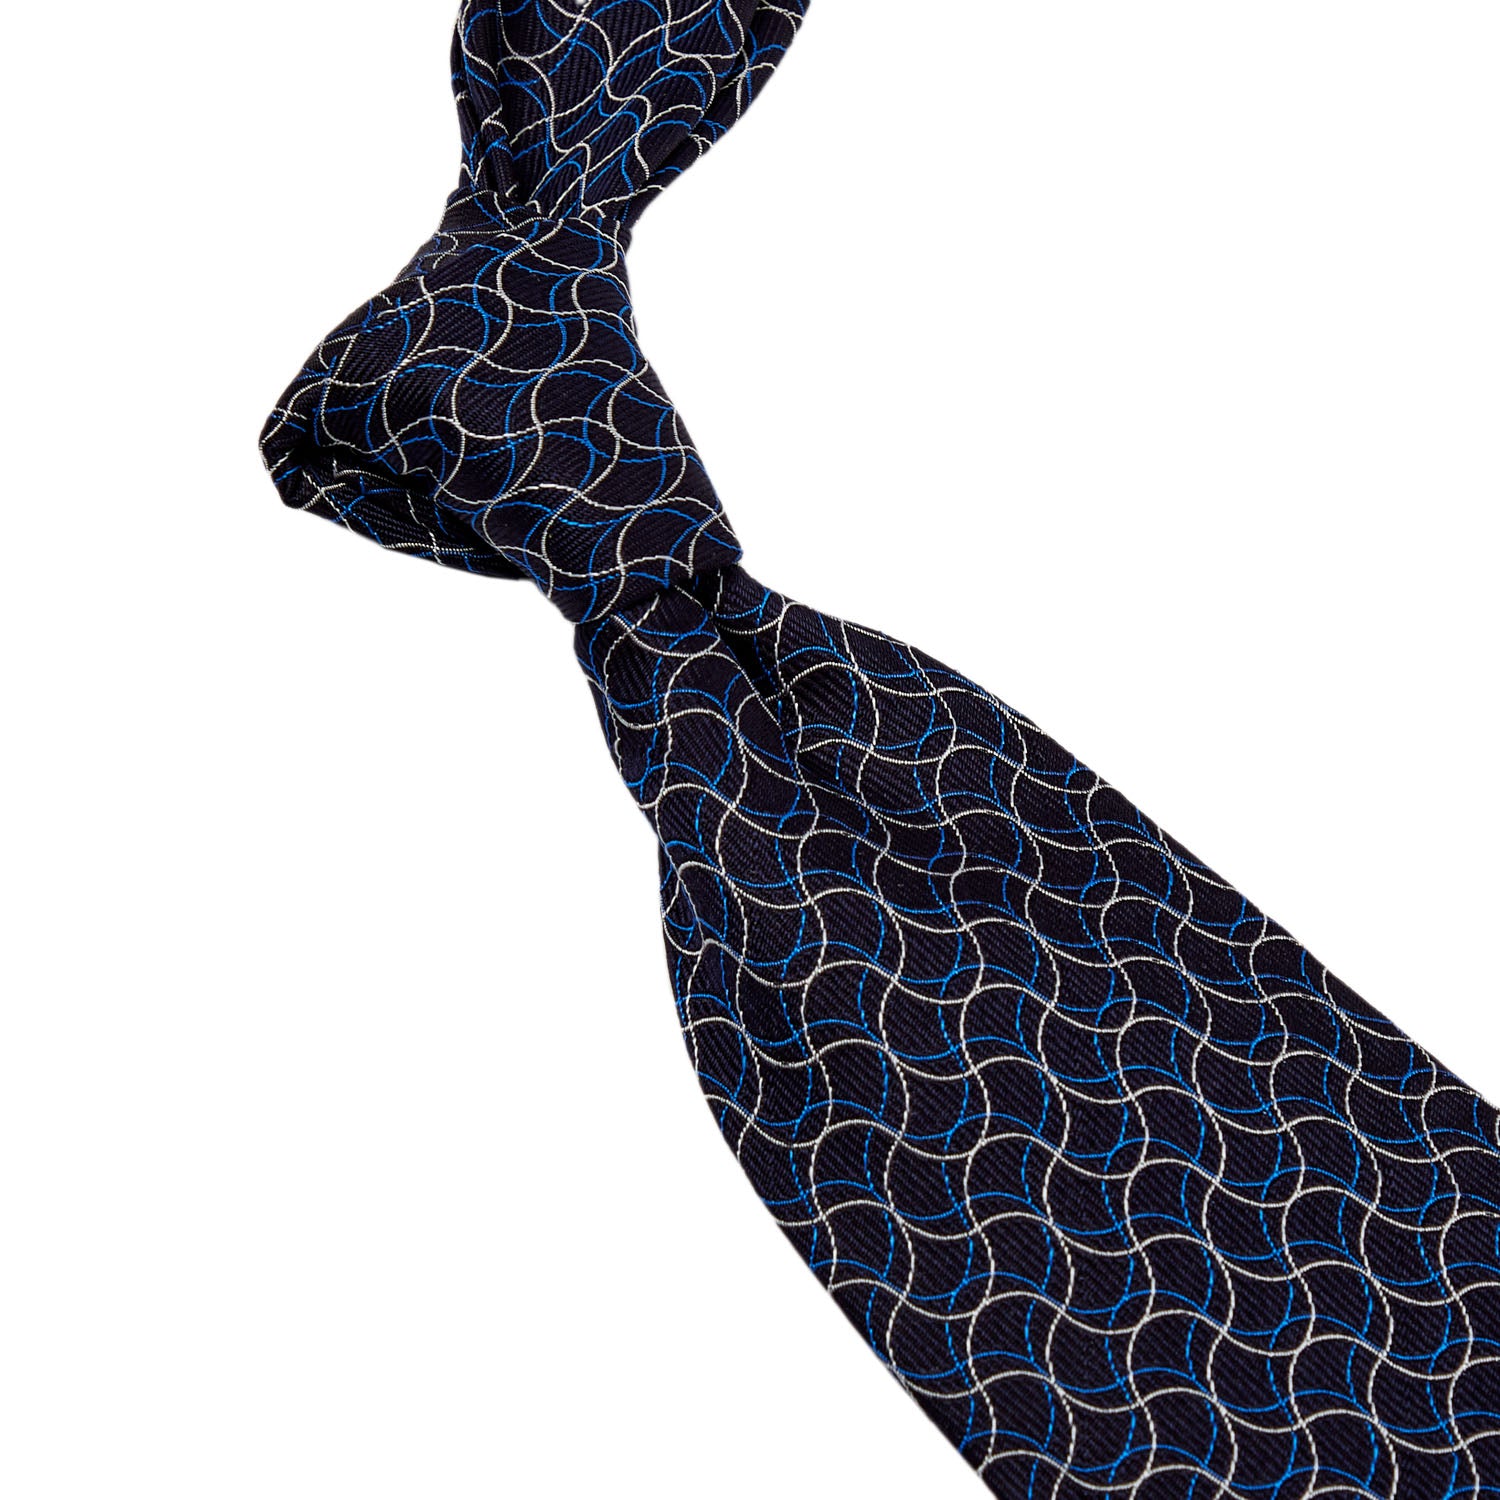 A Sovereign Grade Navy Swirl Jacquard Tie by KirbyAllison.com with a geometric pattern in black and blue.